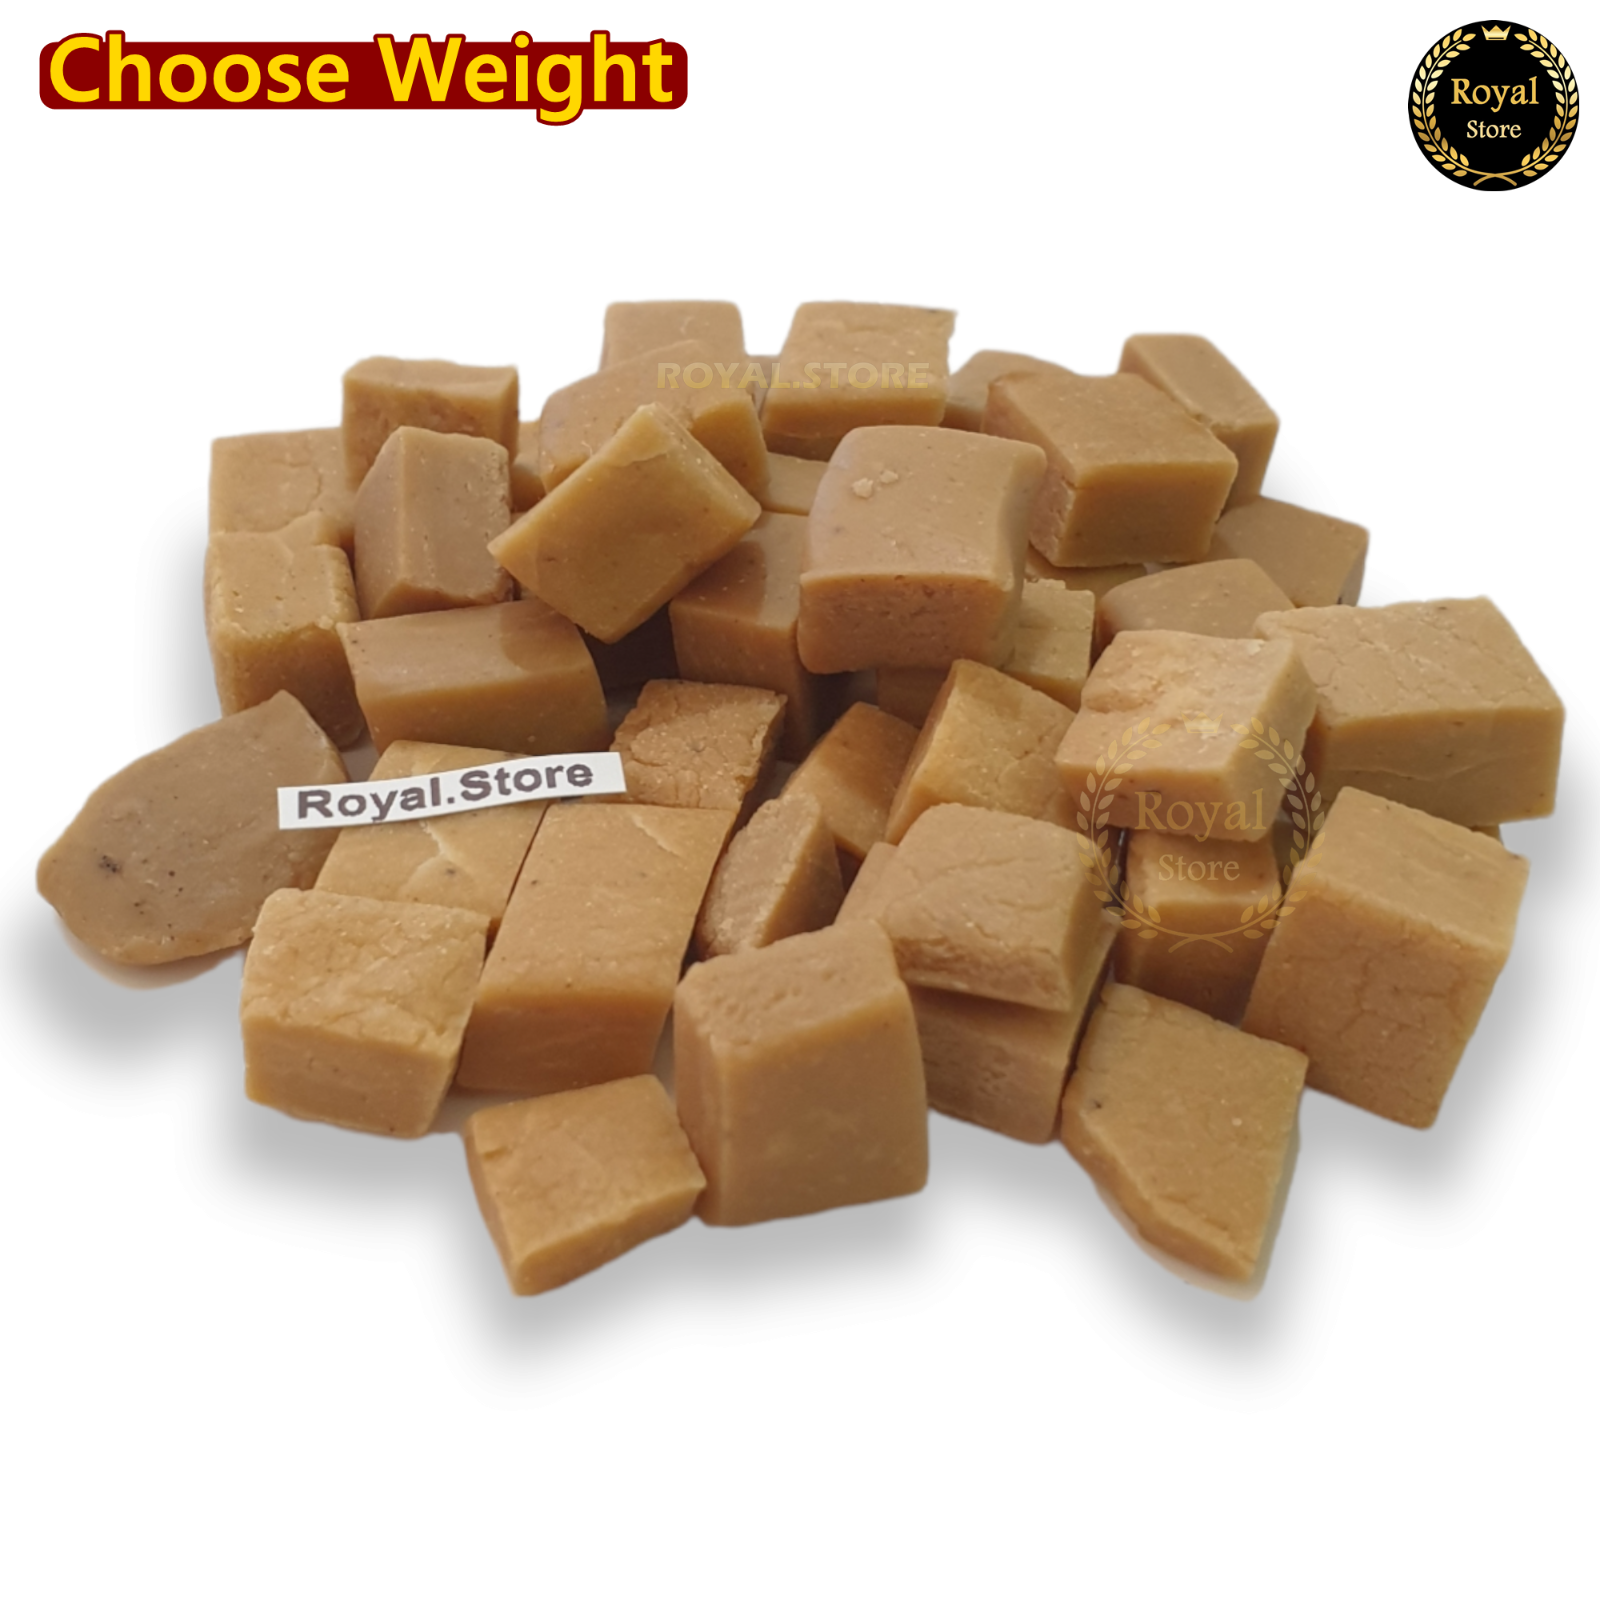 Primary image for Whole asafoetida Organic 100%Pure & natural Indian Cubes (Hing) Homemade...